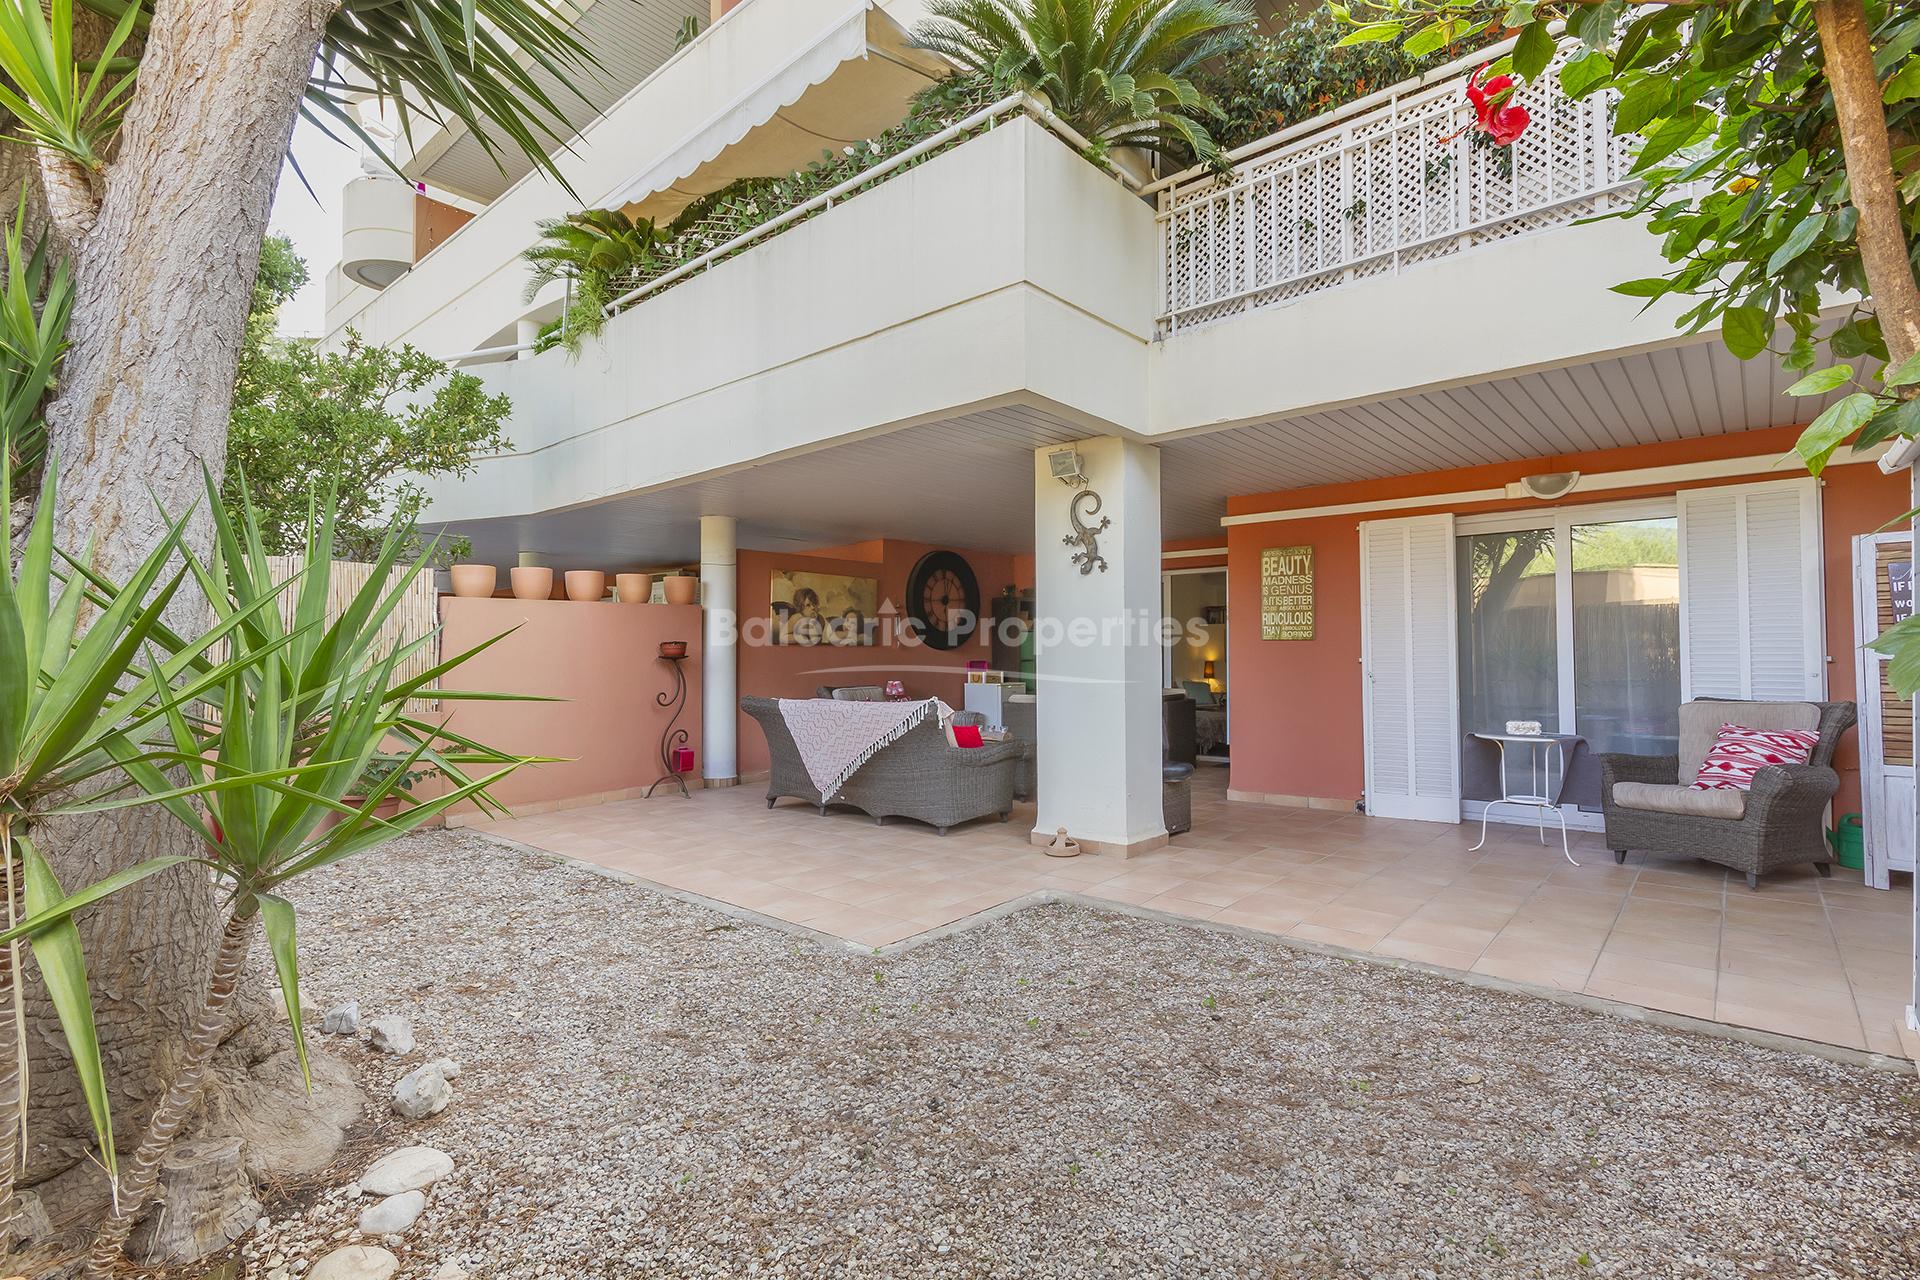 Garden apartment with community pool for sale in Bendinat, Mallorca